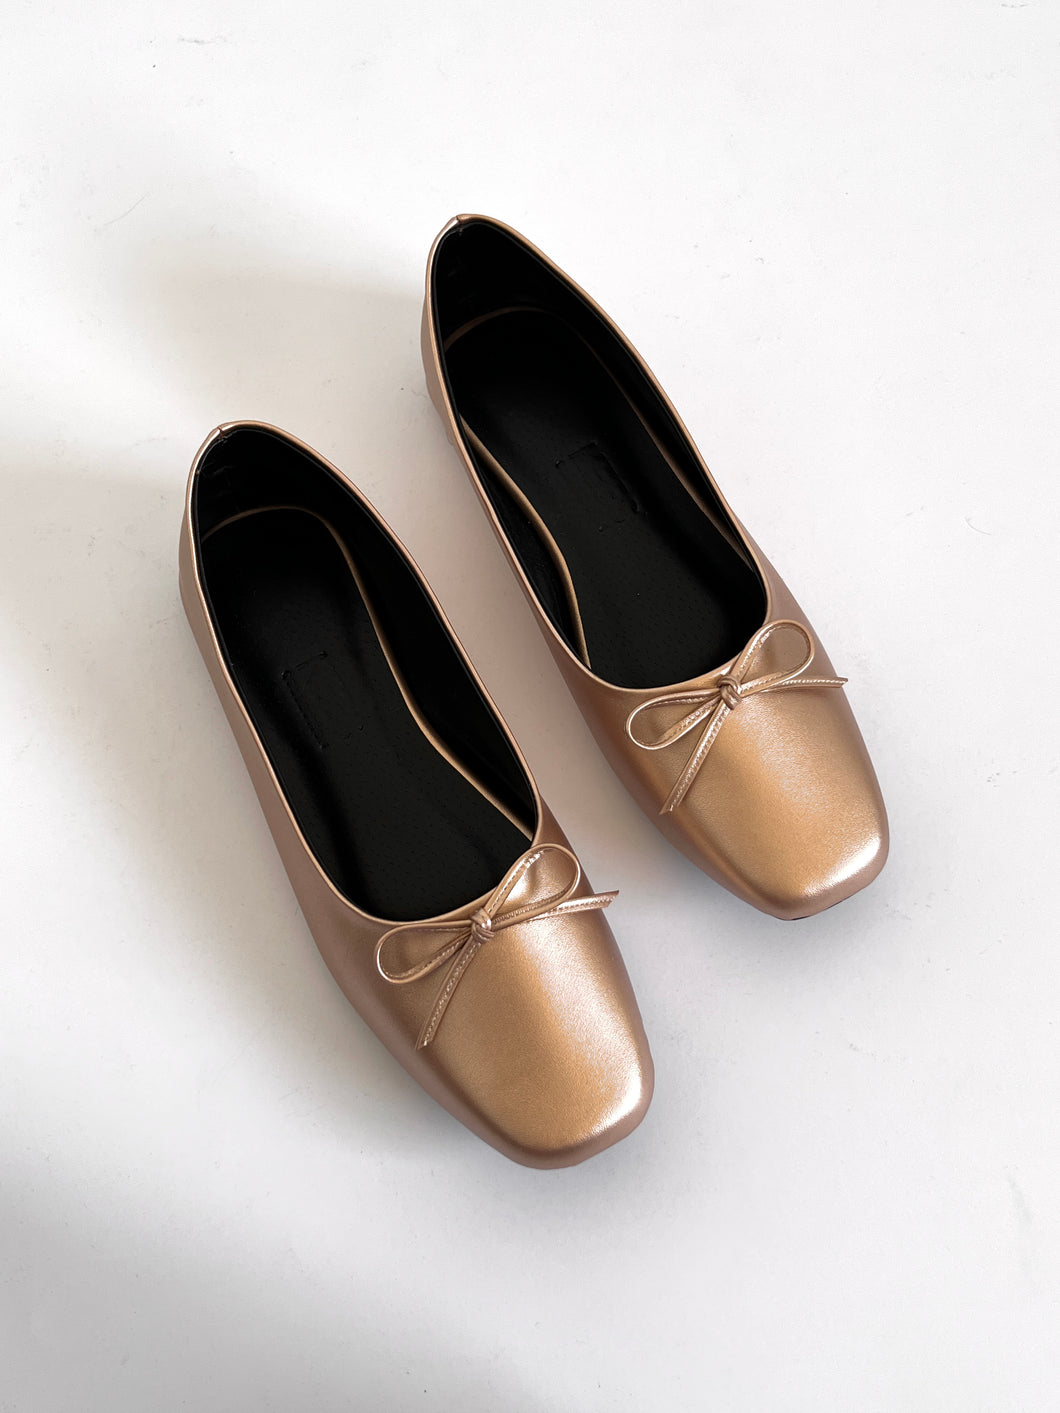 The Tali Shoes Copper